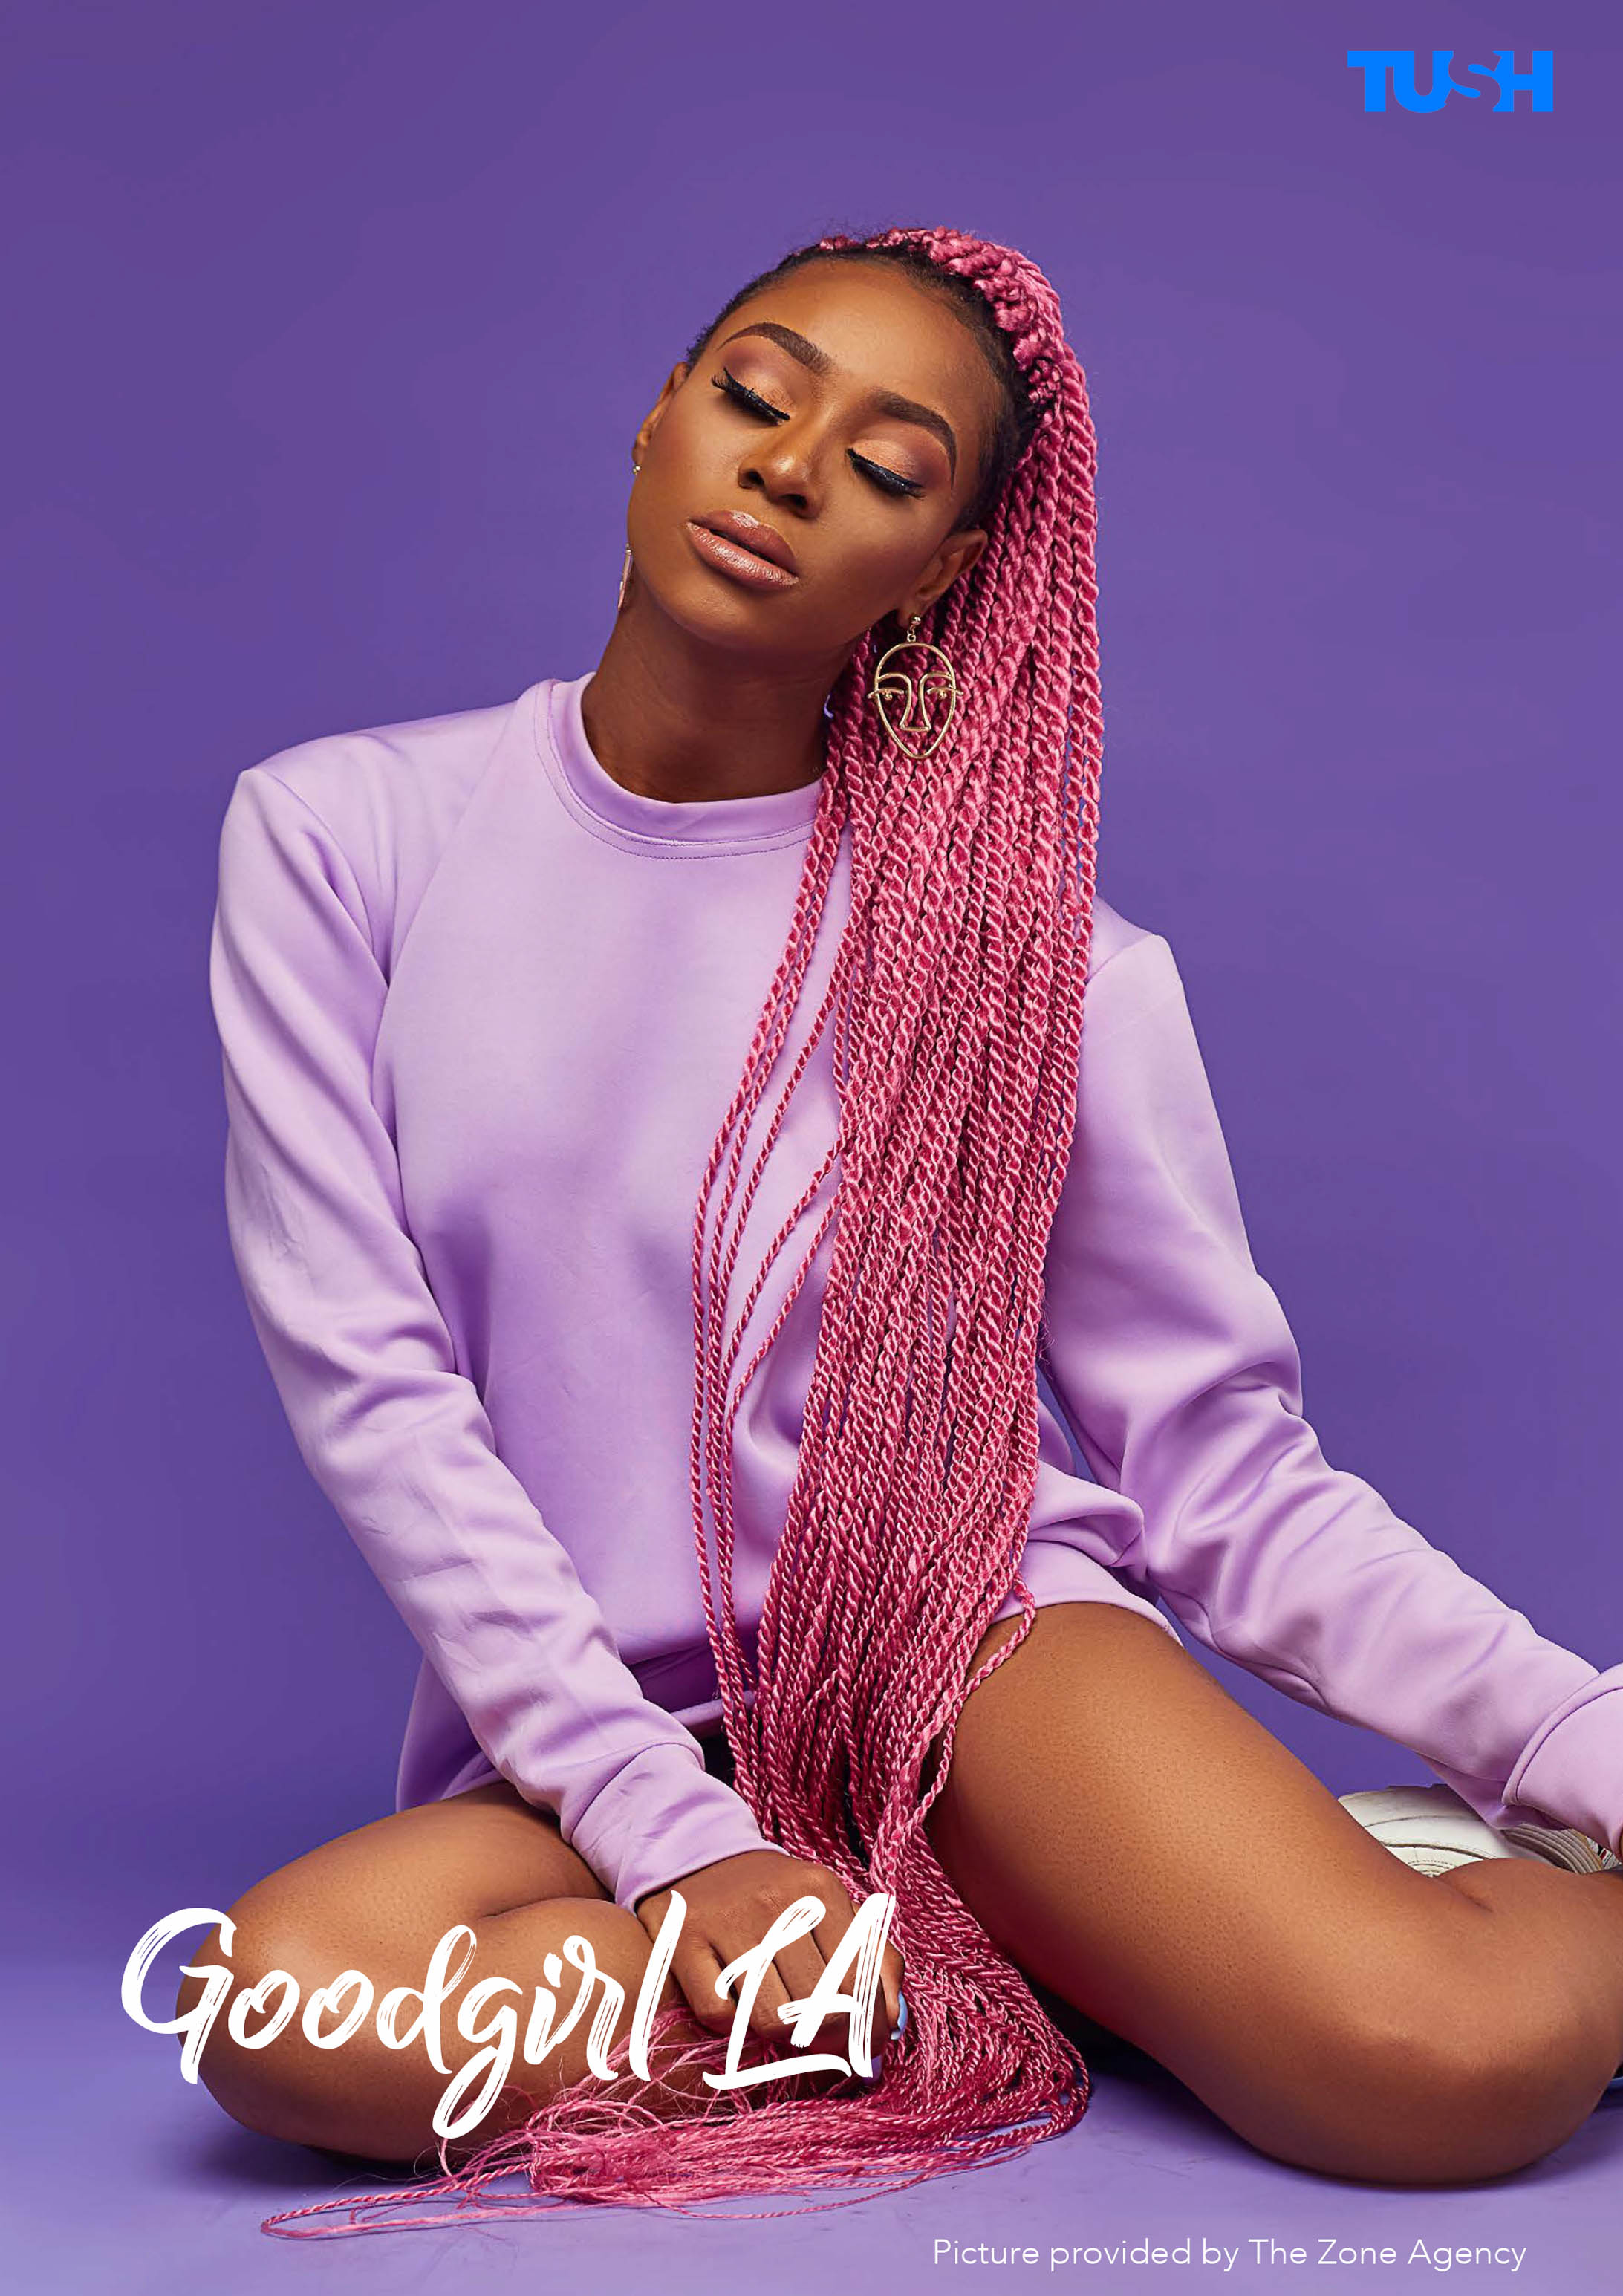 Introducing Tush Magazine’s 22nd issue cover star… Waje! jaiyeorie